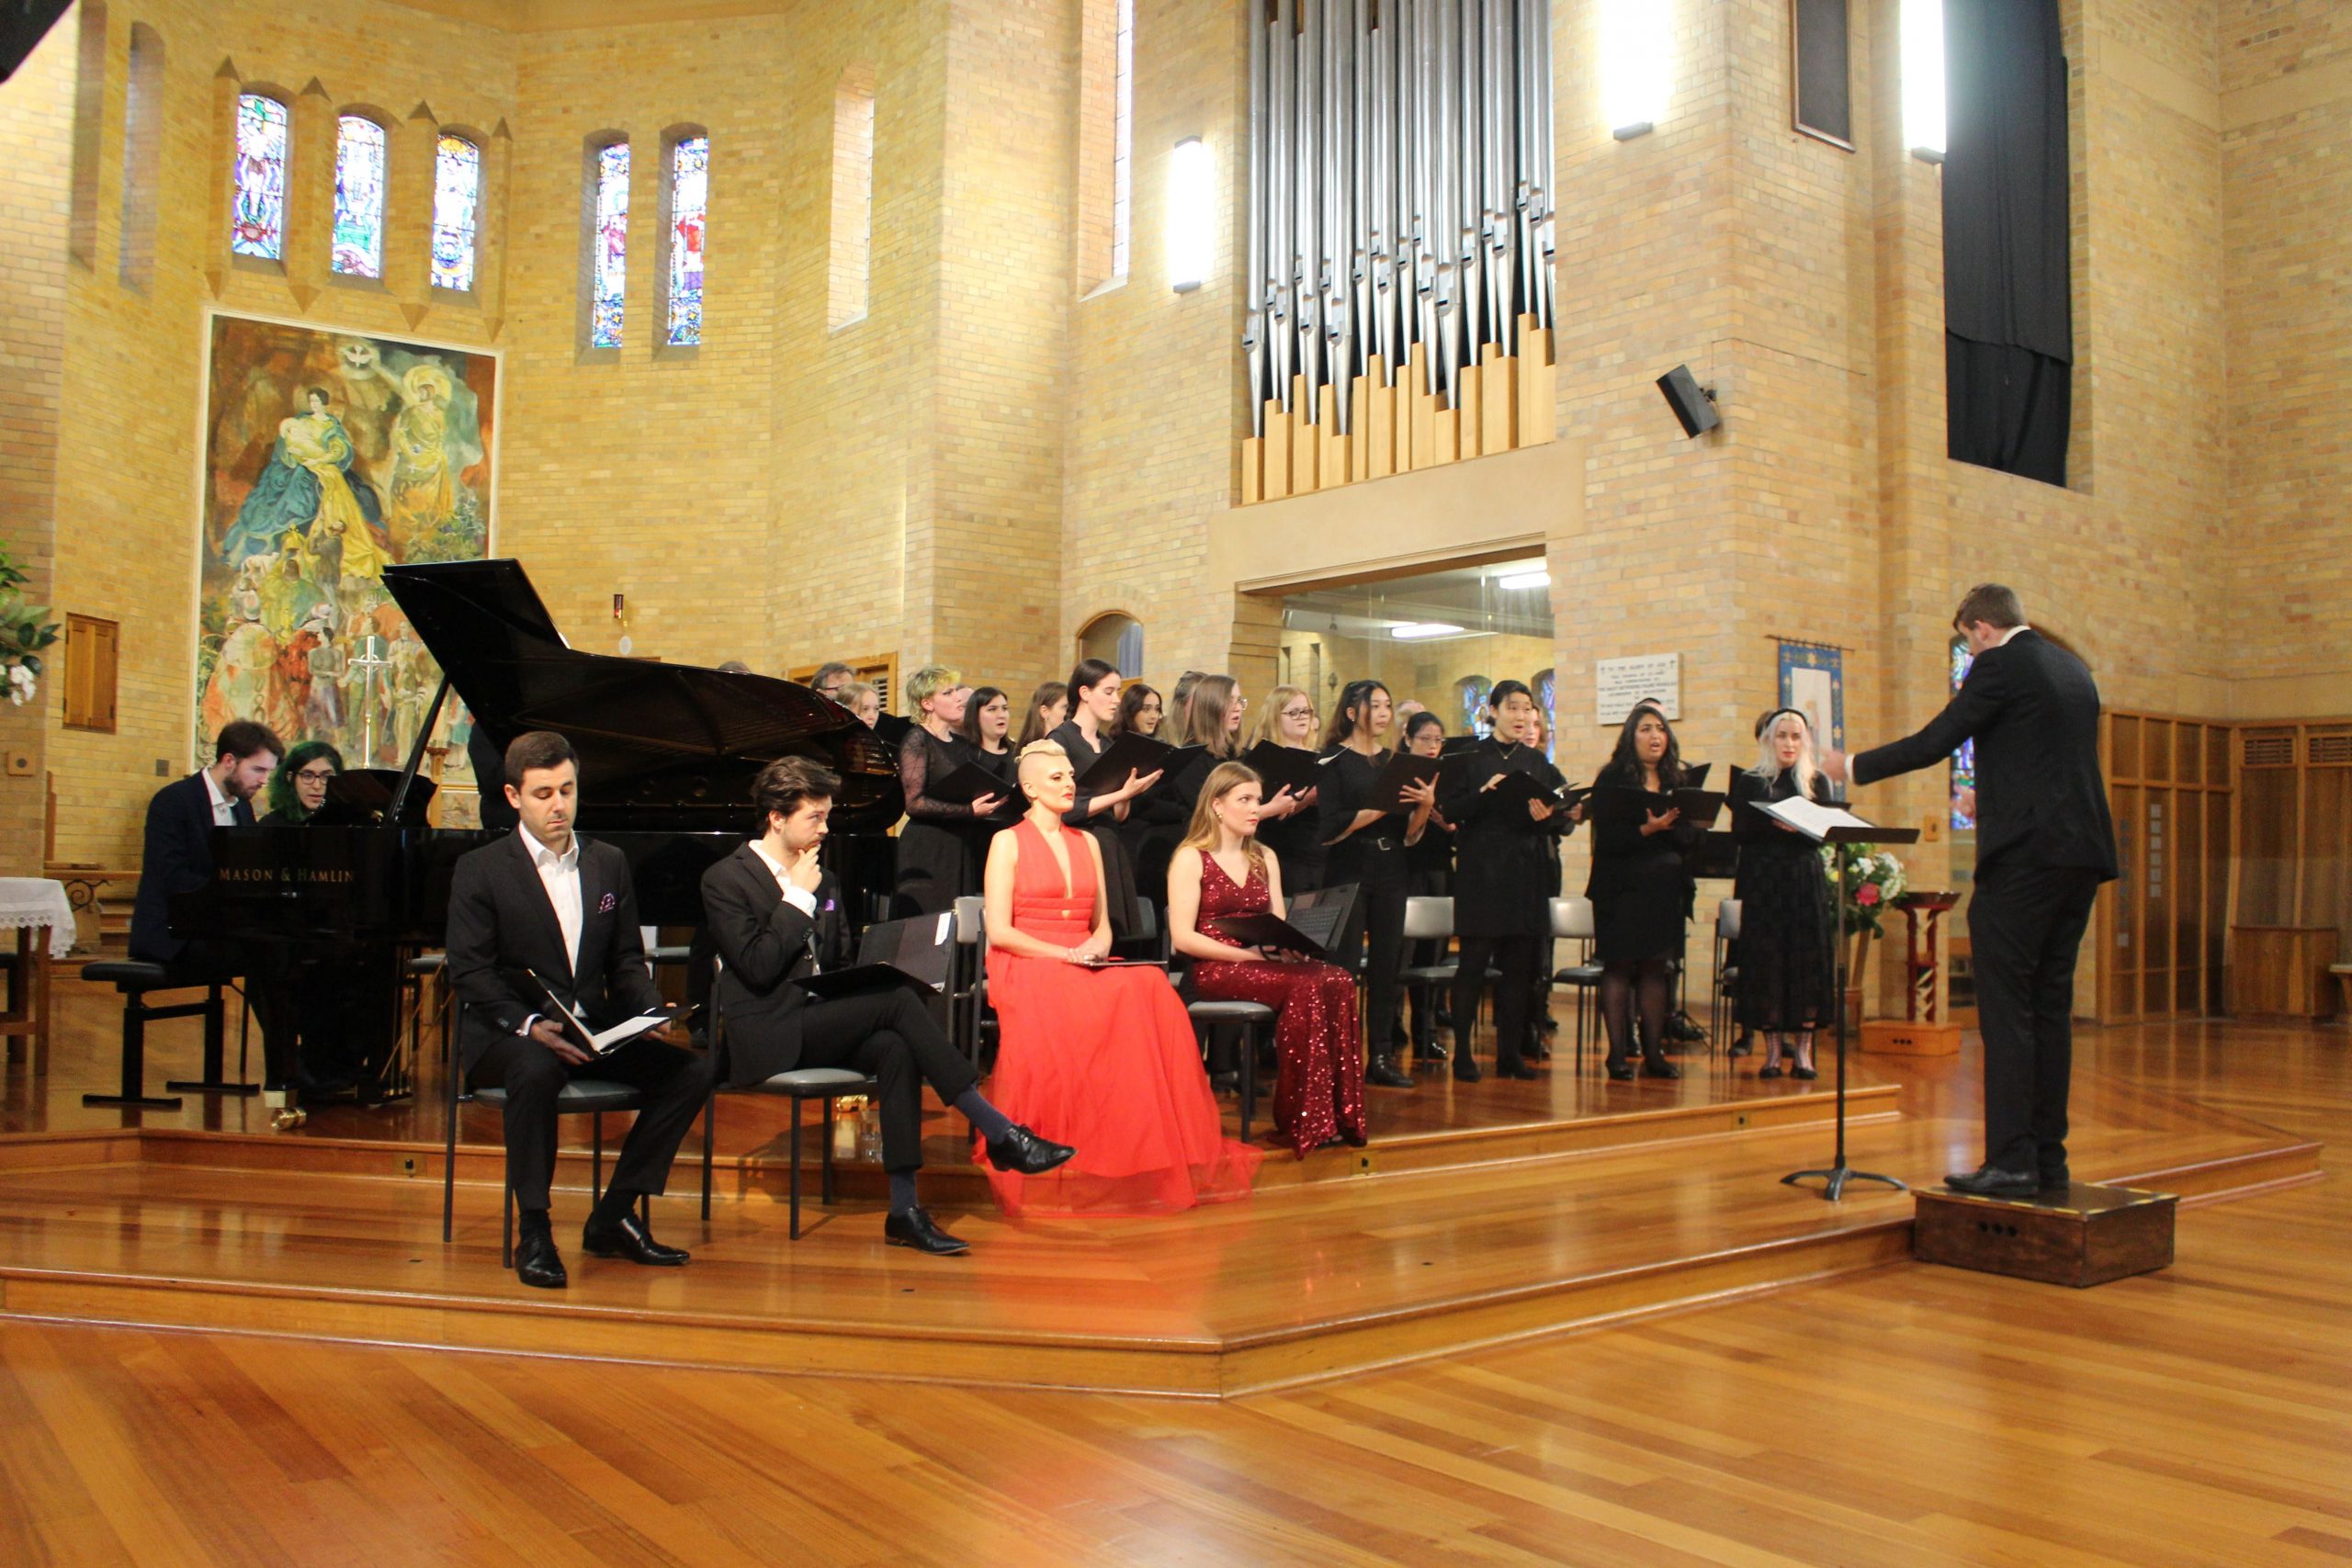 Our choir mid-performance of Stabat Mater! You can see our four soloists seated in chairs near the front of the stage on the left of the image, in front of the piano (behind which two figures sit, one playing and one page-turning). Our conductor Lachie busily conducts, standing on the right of the image in front of a music stand, and we see the choir standing in rows busily singing next to the piano and behind the soloists. The environment is light brown and churchy - we see what looks like a pipe organ and an intricate painting in the background.